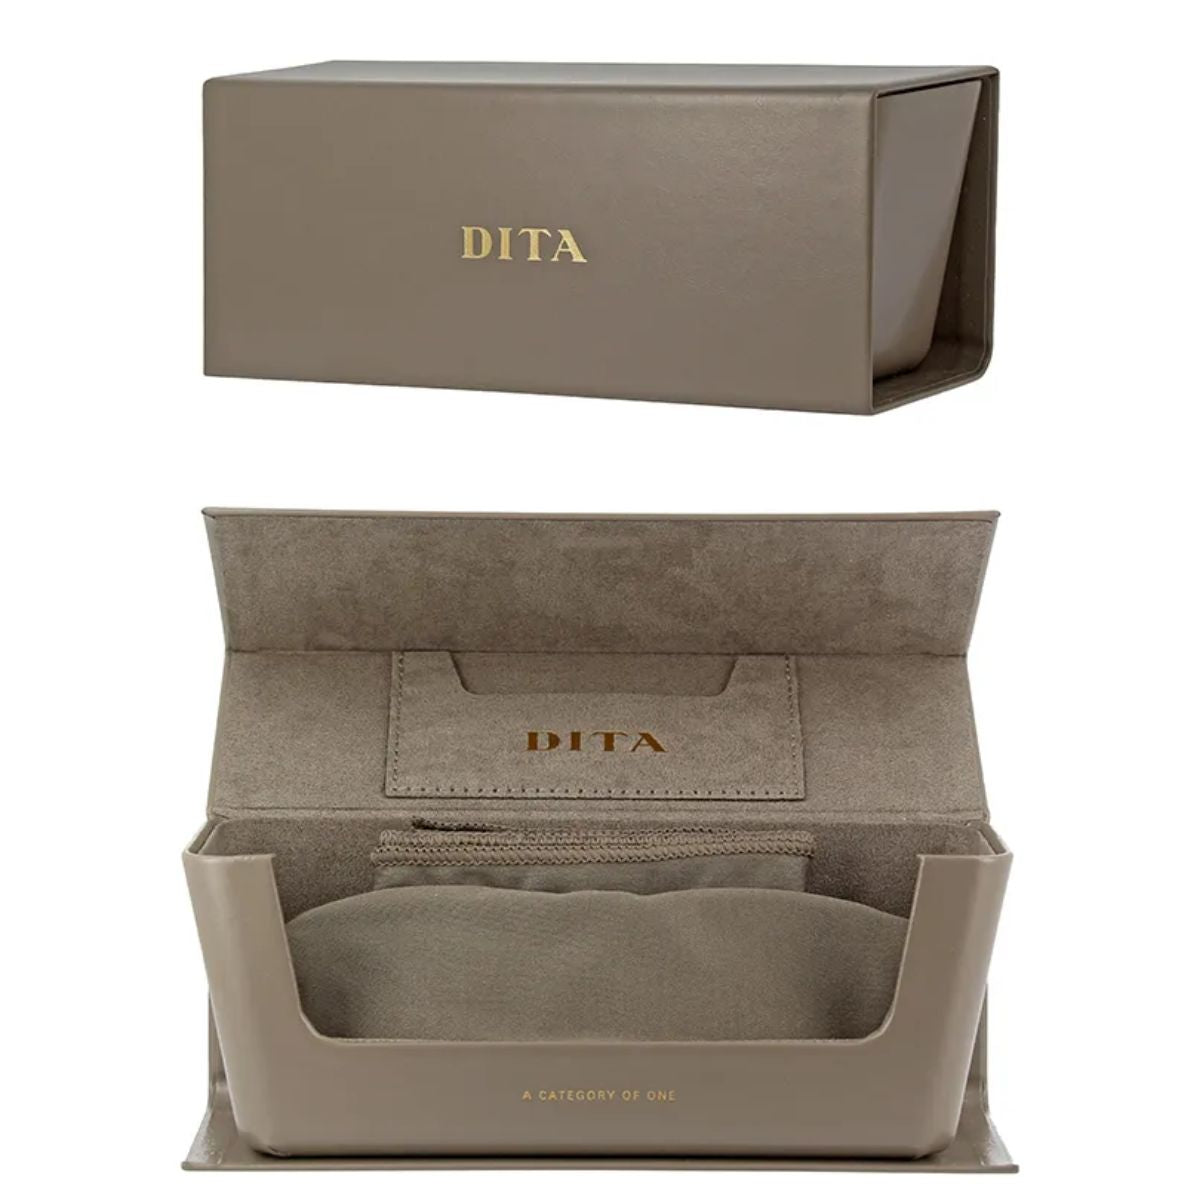 "Dita SUBSYSTEM DTS141-A-03 Sunglass Case Available At Optorium"